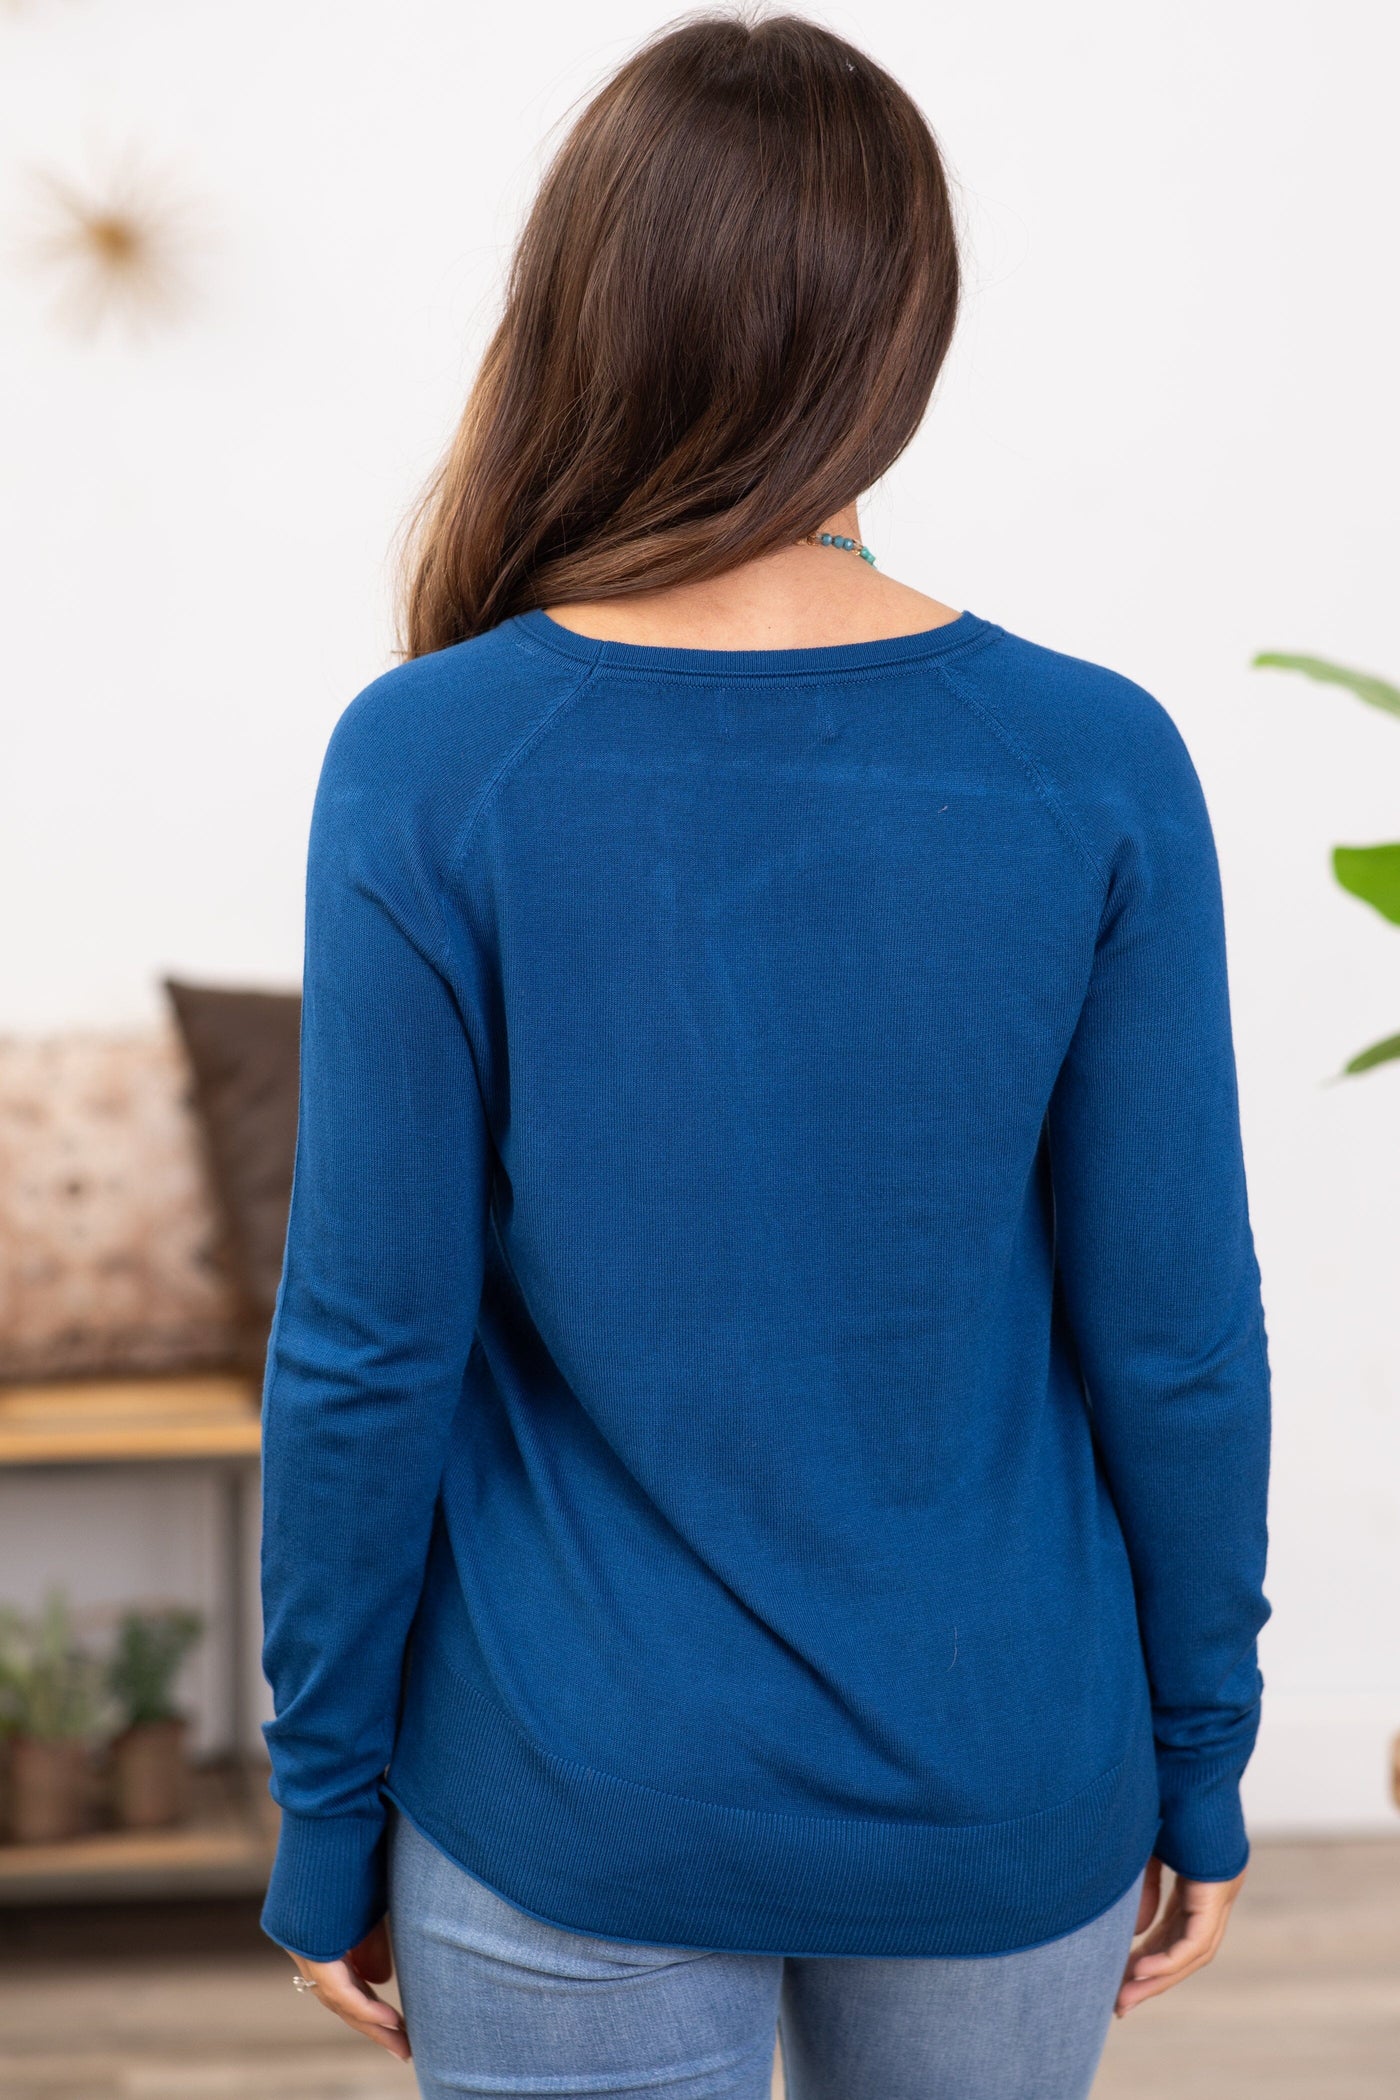 Slate Blue Lightweight Sweater With Side Slit - Filly Flair